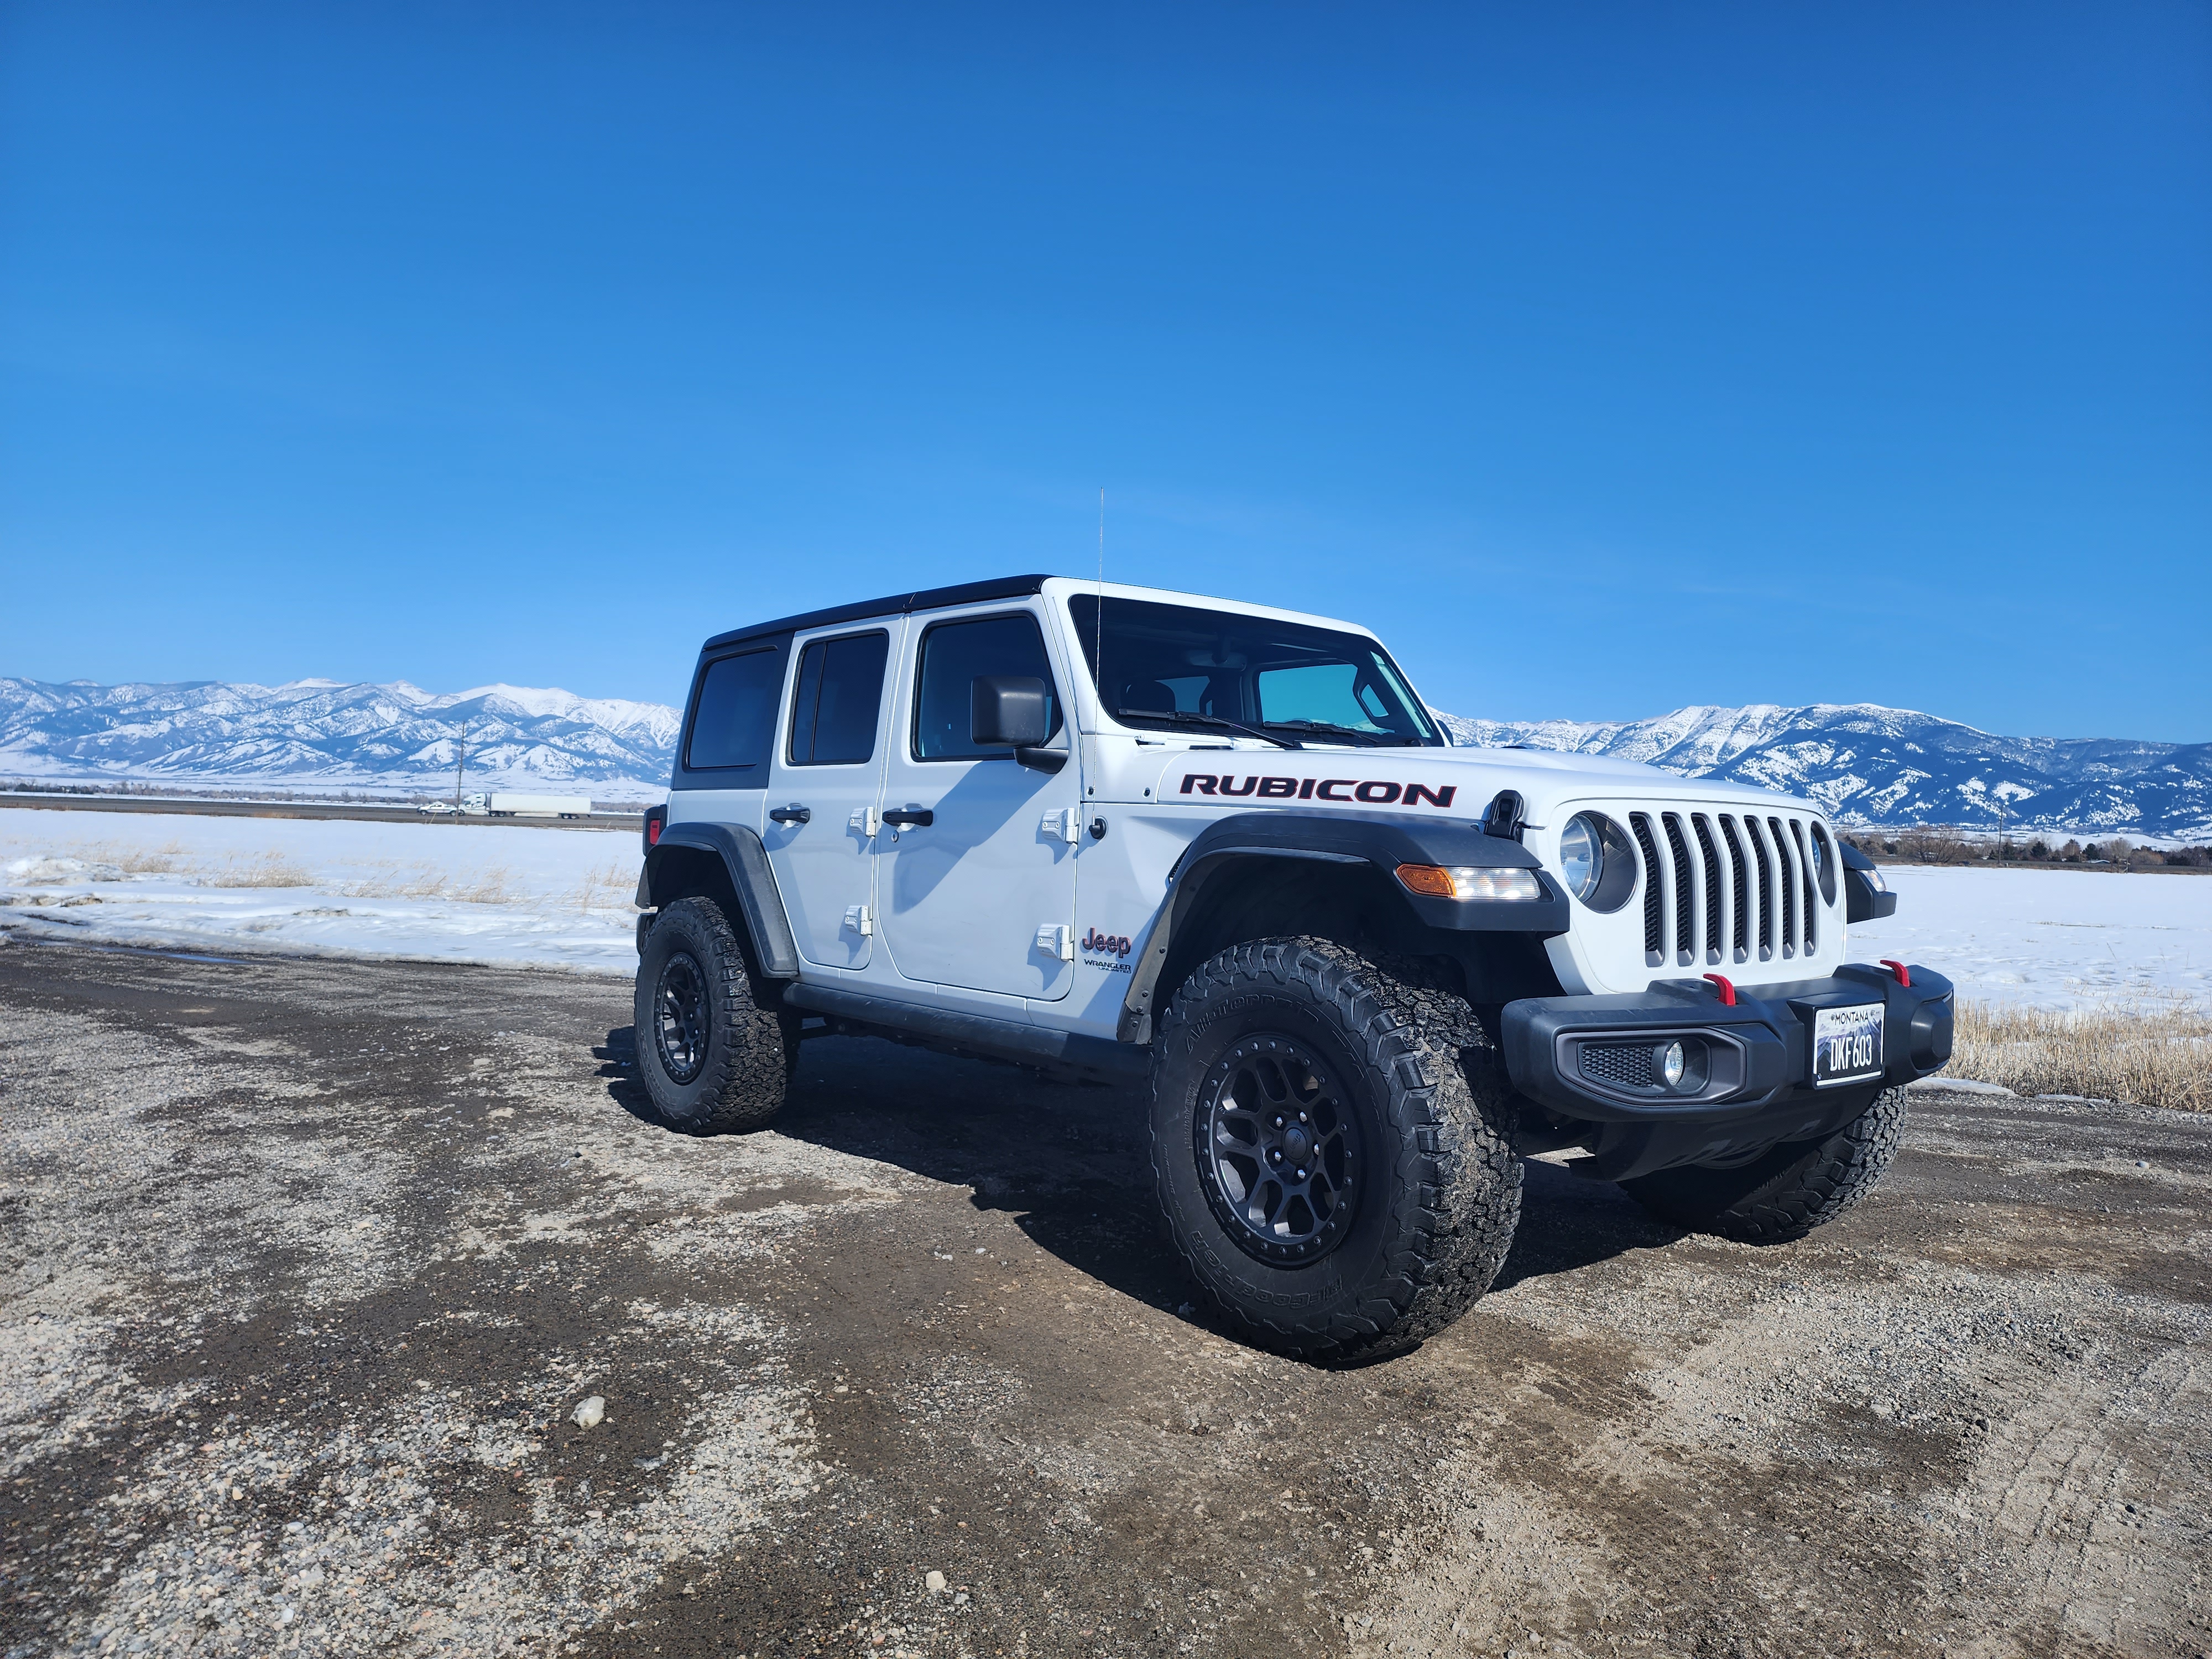 Used Jeep Wrangler for Sale in Bozeman, MT - Autotrader